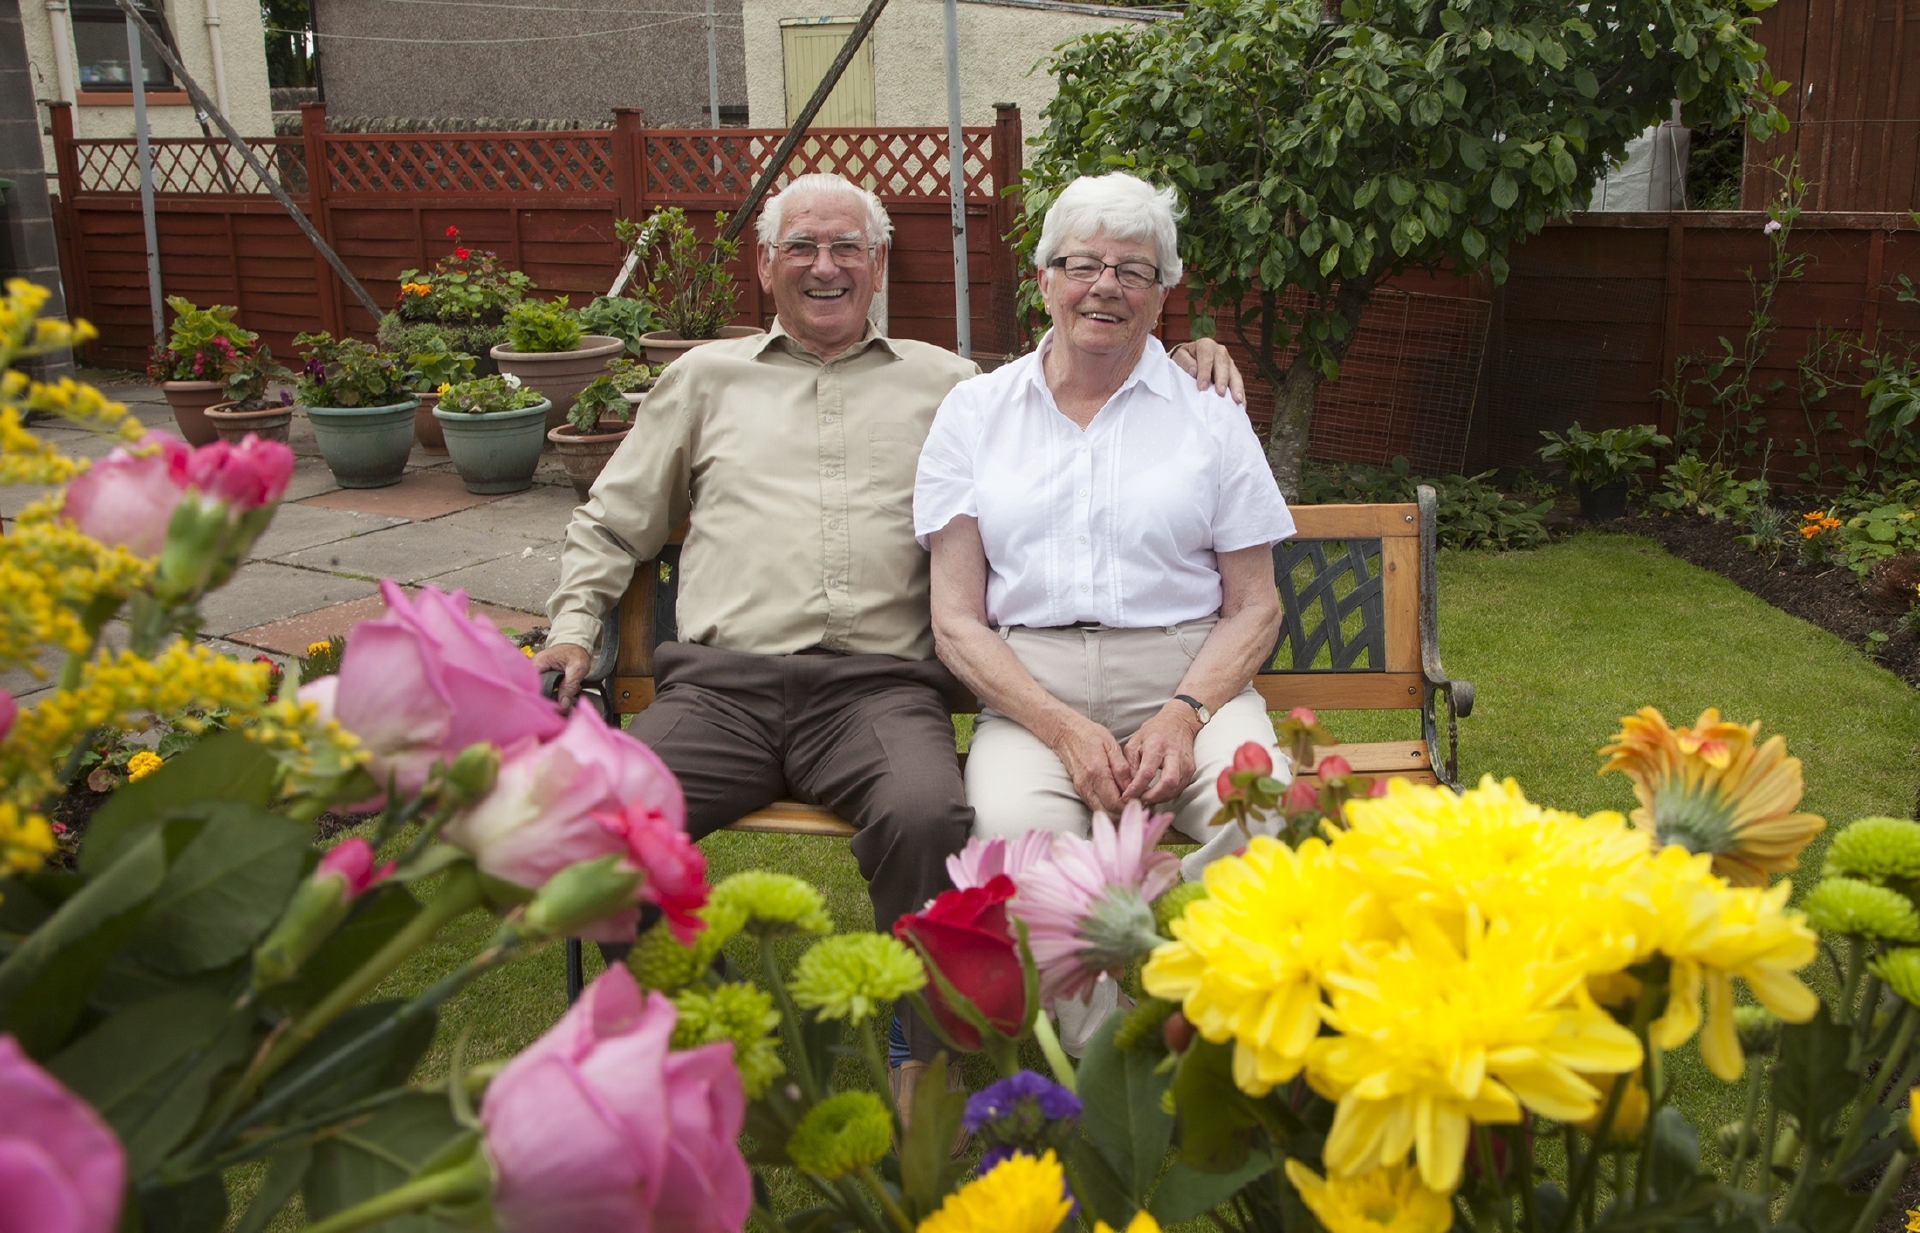 Chelsea Flower Show competition winner Marjorie Prophet and husband Neil pictured in their garden at home in Forfar.